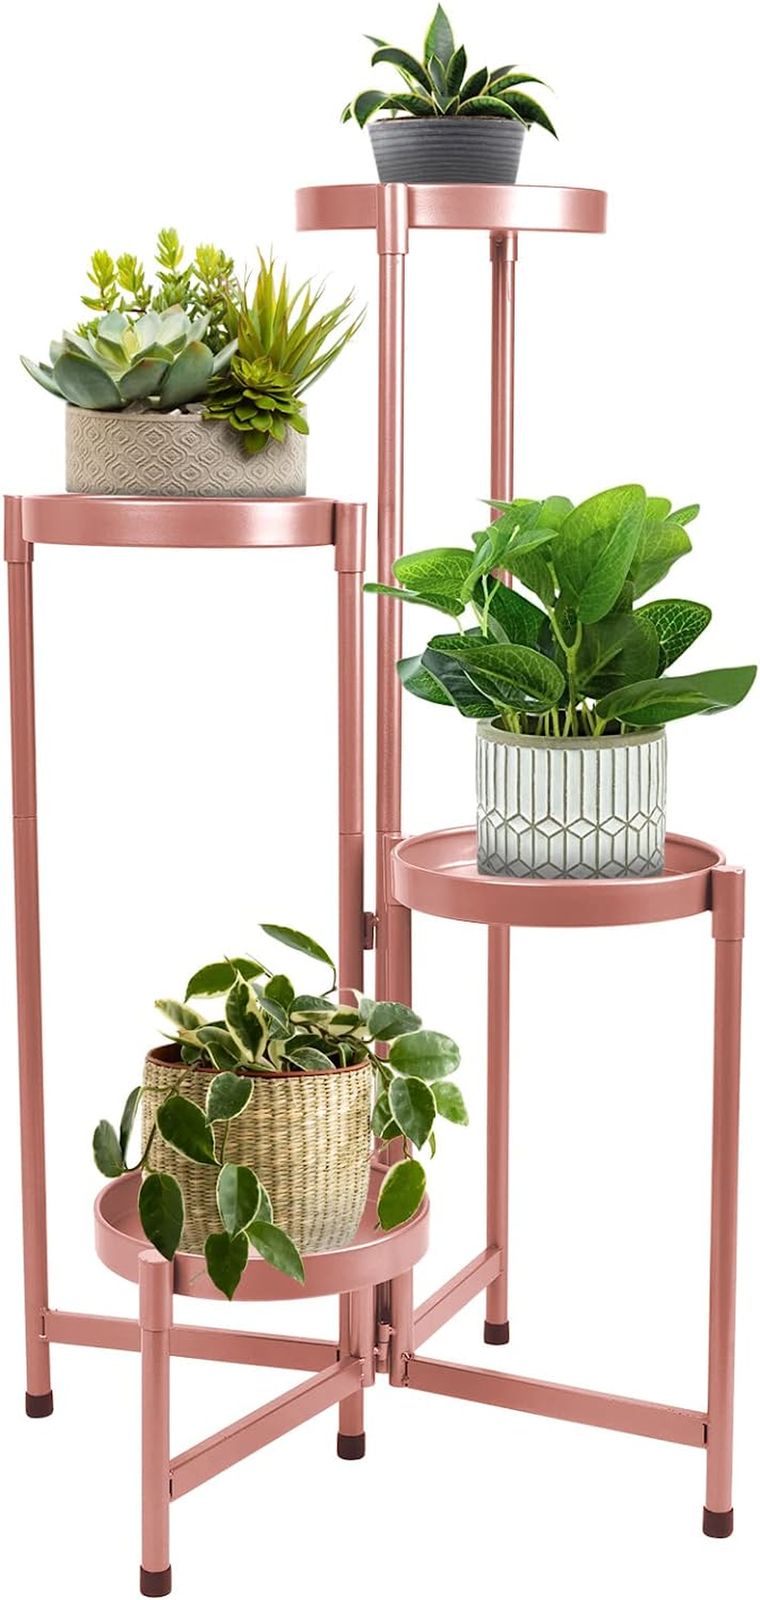 4 Tier Plant Stand Indoor Outdoor, 31 Inch Tall Metal Plant Shelf  Waterproof, Pl 744110503296 | Ebay With Regard To 31 Inch Plant Stands (View 8 of 15)